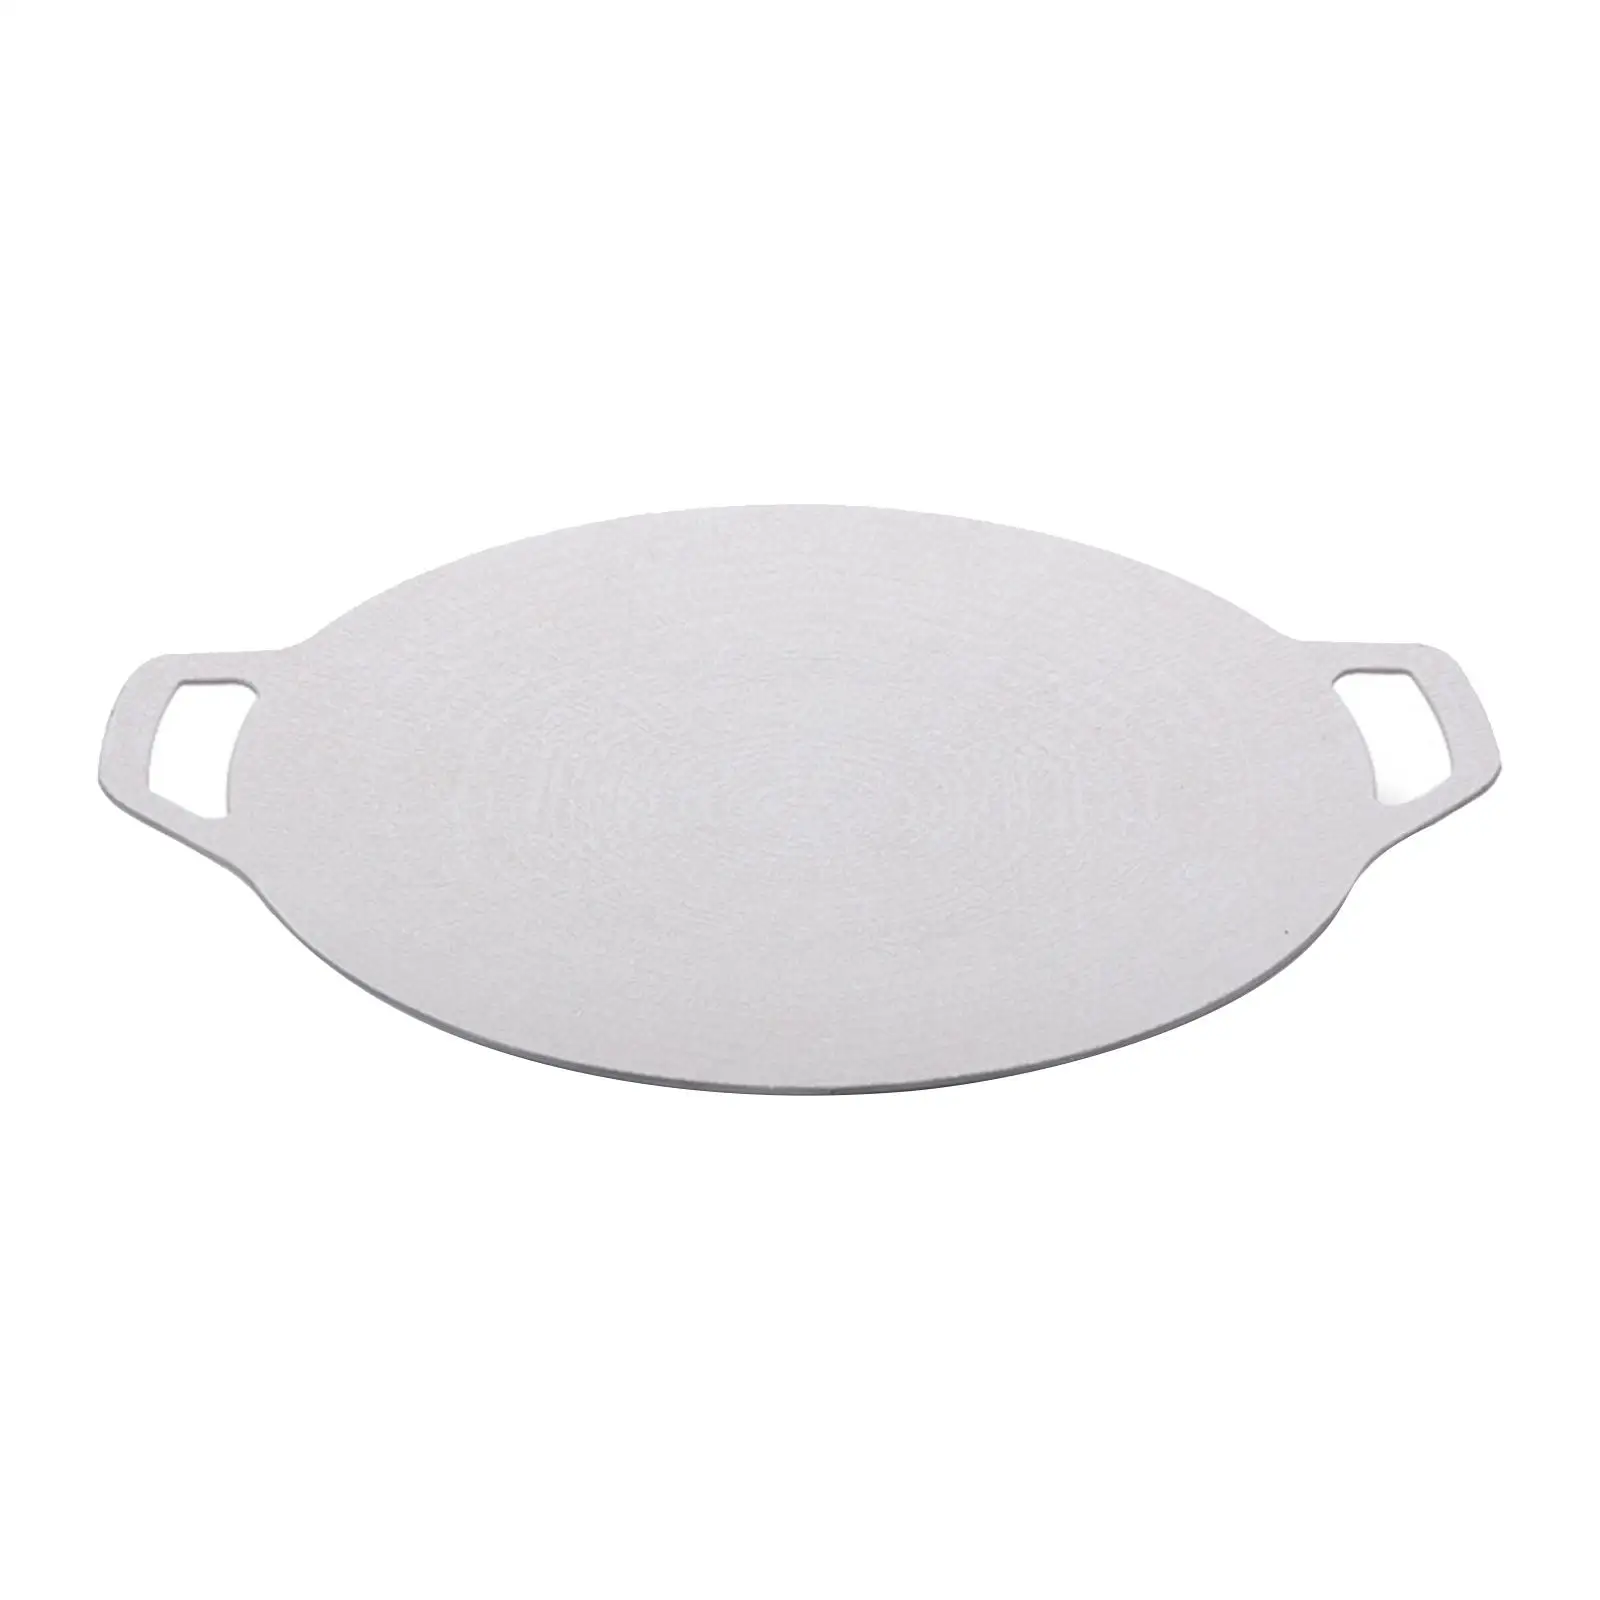 Aluminium Frying Pan Griddle with Handle Tray Skillet Round Portable Grill Pans for Indoor Outdoor Barbecue Steak Camping